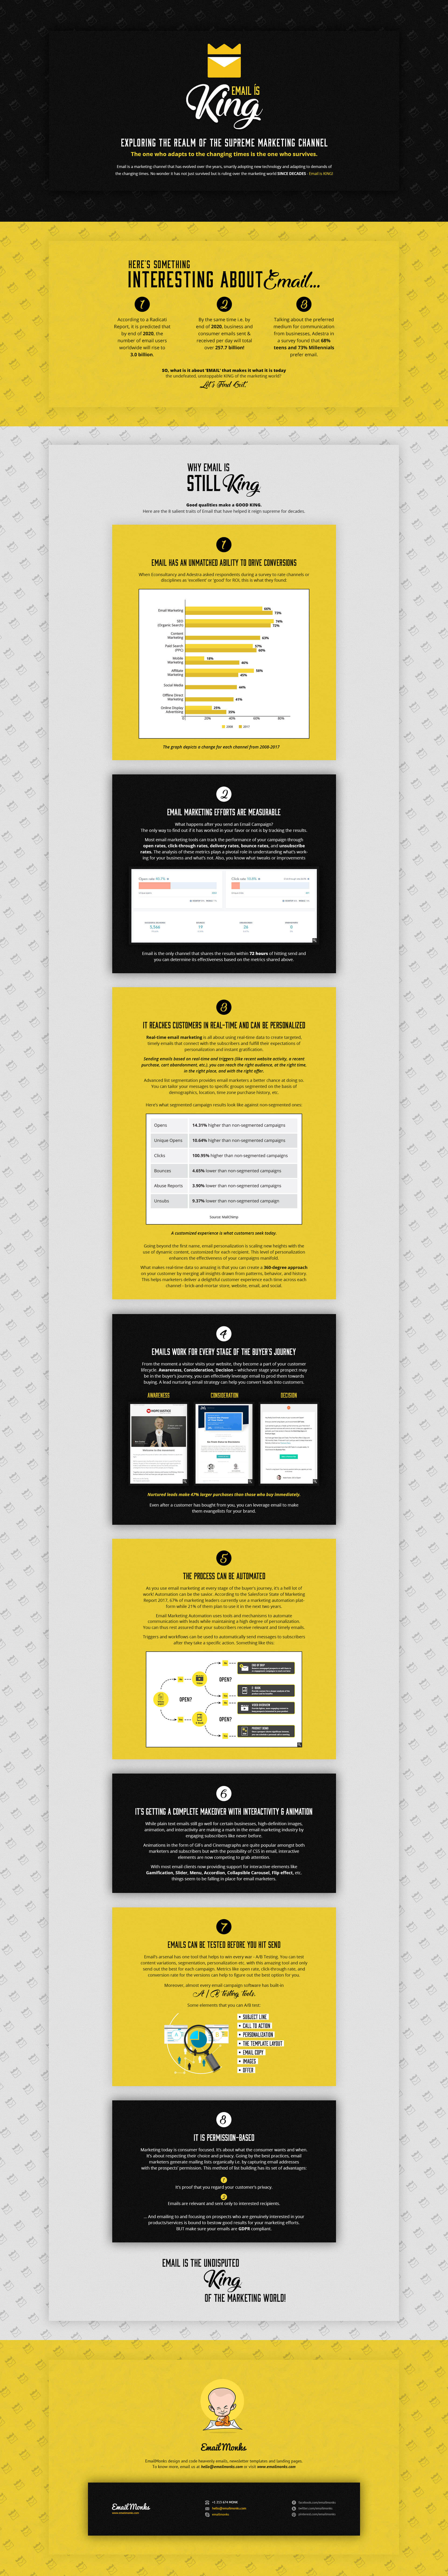 Email-is-King-Infographic